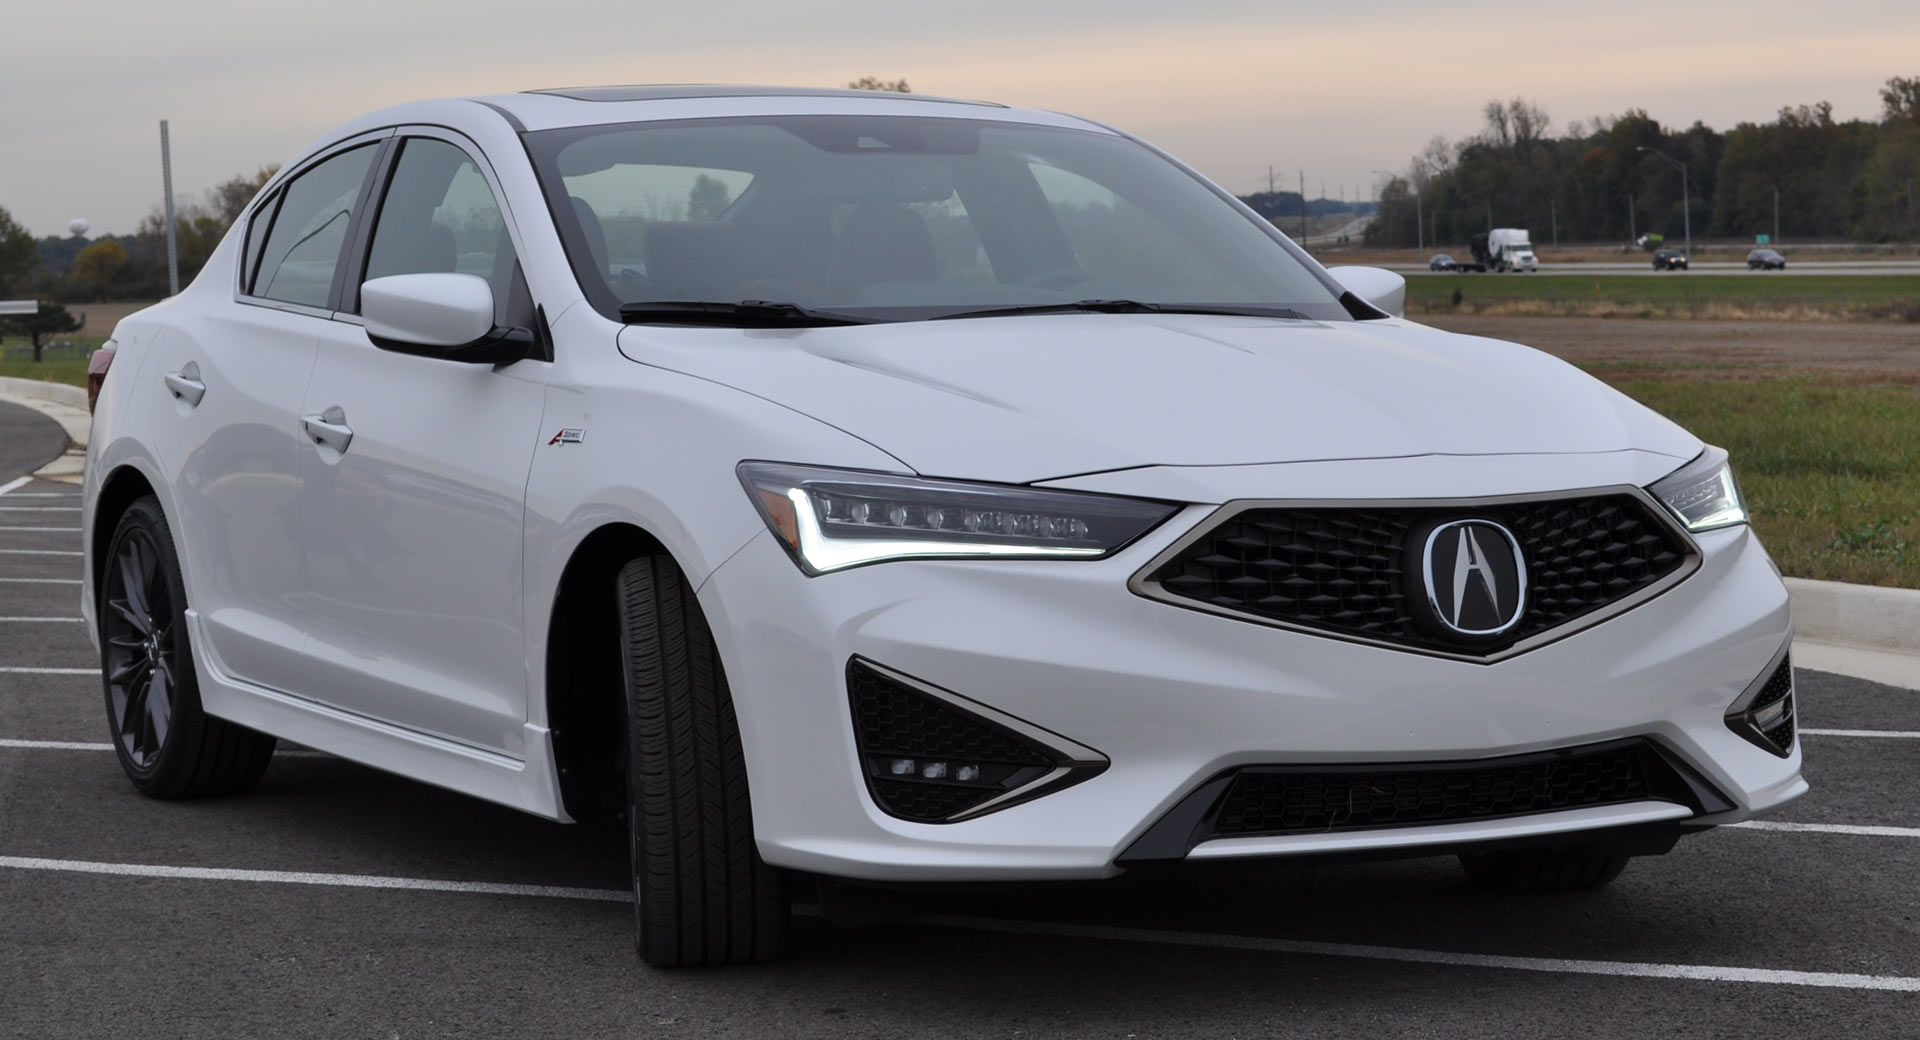 First Drive: 2019 Acura ILX Becomes More Compelling Thanks ...